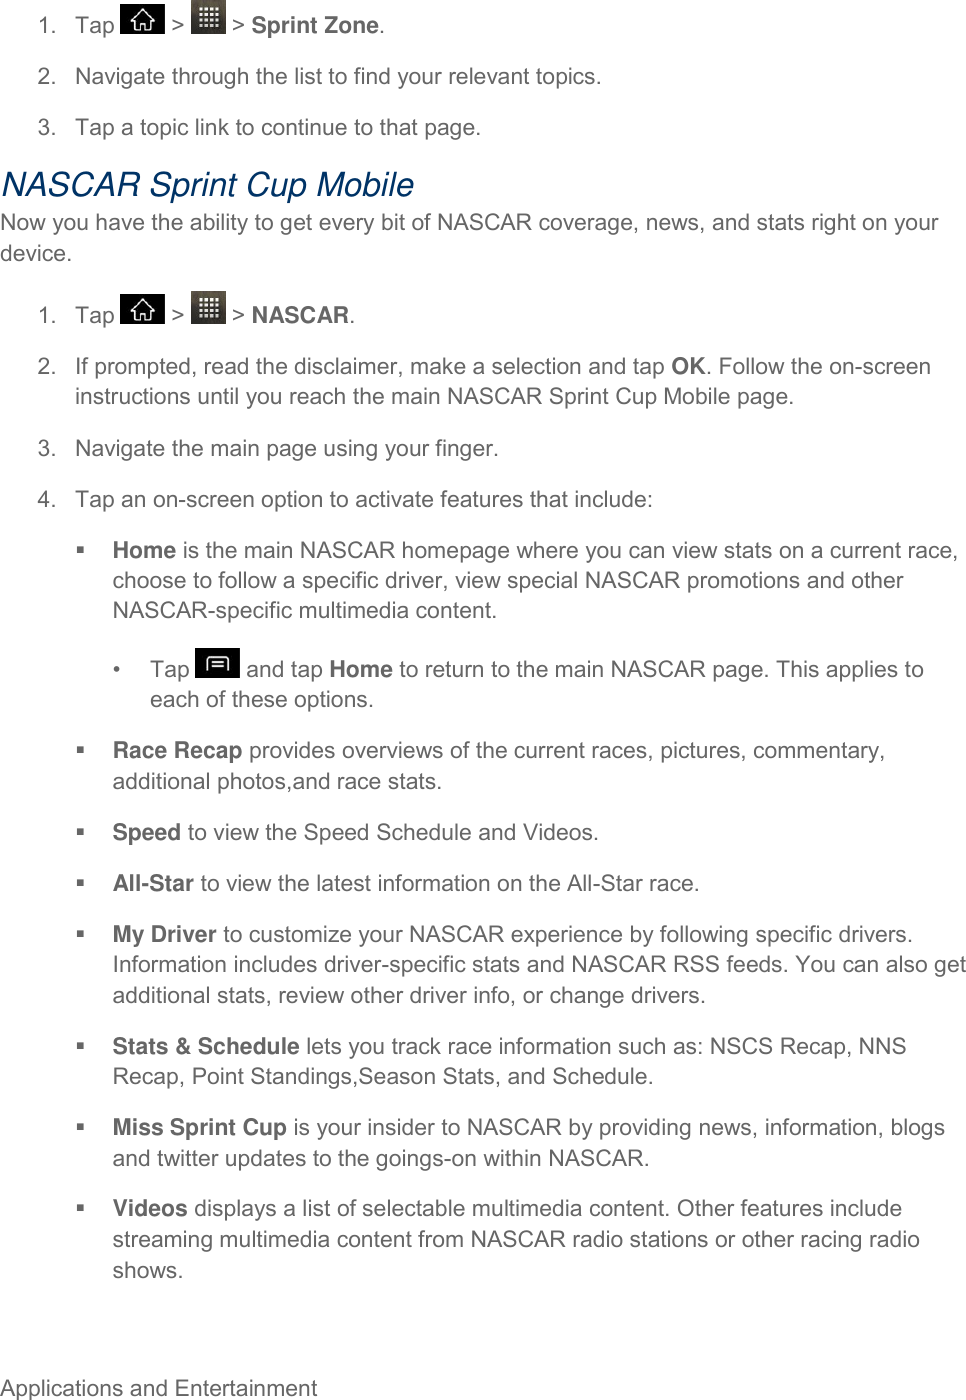 Applications and Entertainment     1.  Tap   &gt;   &gt; Sprint Zone. 2.  Navigate through the list to find your relevant topics. 3.  Tap a topic link to continue to that page. NASCAR Sprint Cup Mobile Now you have the ability to get every bit of NASCAR coverage, news, and stats right on your device. 1.  Tap   &gt;   &gt; NASCAR. 2.  If prompted, read the disclaimer, make a selection and tap OK. Follow the on-screen instructions until you reach the main NASCAR Sprint Cup Mobile page. 3.  Navigate the main page using your finger. 4.  Tap an on-screen option to activate features that include:  Home is the main NASCAR homepage where you can view stats on a current race, choose to follow a specific driver, view special NASCAR promotions and other NASCAR-specific multimedia content. •  Tap   and tap Home to return to the main NASCAR page. This applies to each of these options.  Race Recap provides overviews of the current races, pictures, commentary, additional photos,and race stats.  Speed to view the Speed Schedule and Videos.  All-Star to view the latest information on the All-Star race.  My Driver to customize your NASCAR experience by following specific drivers. Information includes driver-specific stats and NASCAR RSS feeds. You can also get additional stats, review other driver info, or change drivers.  Stats &amp; Schedule lets you track race information such as: NSCS Recap, NNS Recap, Point Standings,Season Stats, and Schedule.  Miss Sprint Cup is your insider to NASCAR by providing news, information, blogs and twitter updates to the goings-on within NASCAR.  Videos displays a list of selectable multimedia content. Other features include streaming multimedia content from NASCAR radio stations or other racing radio shows. 